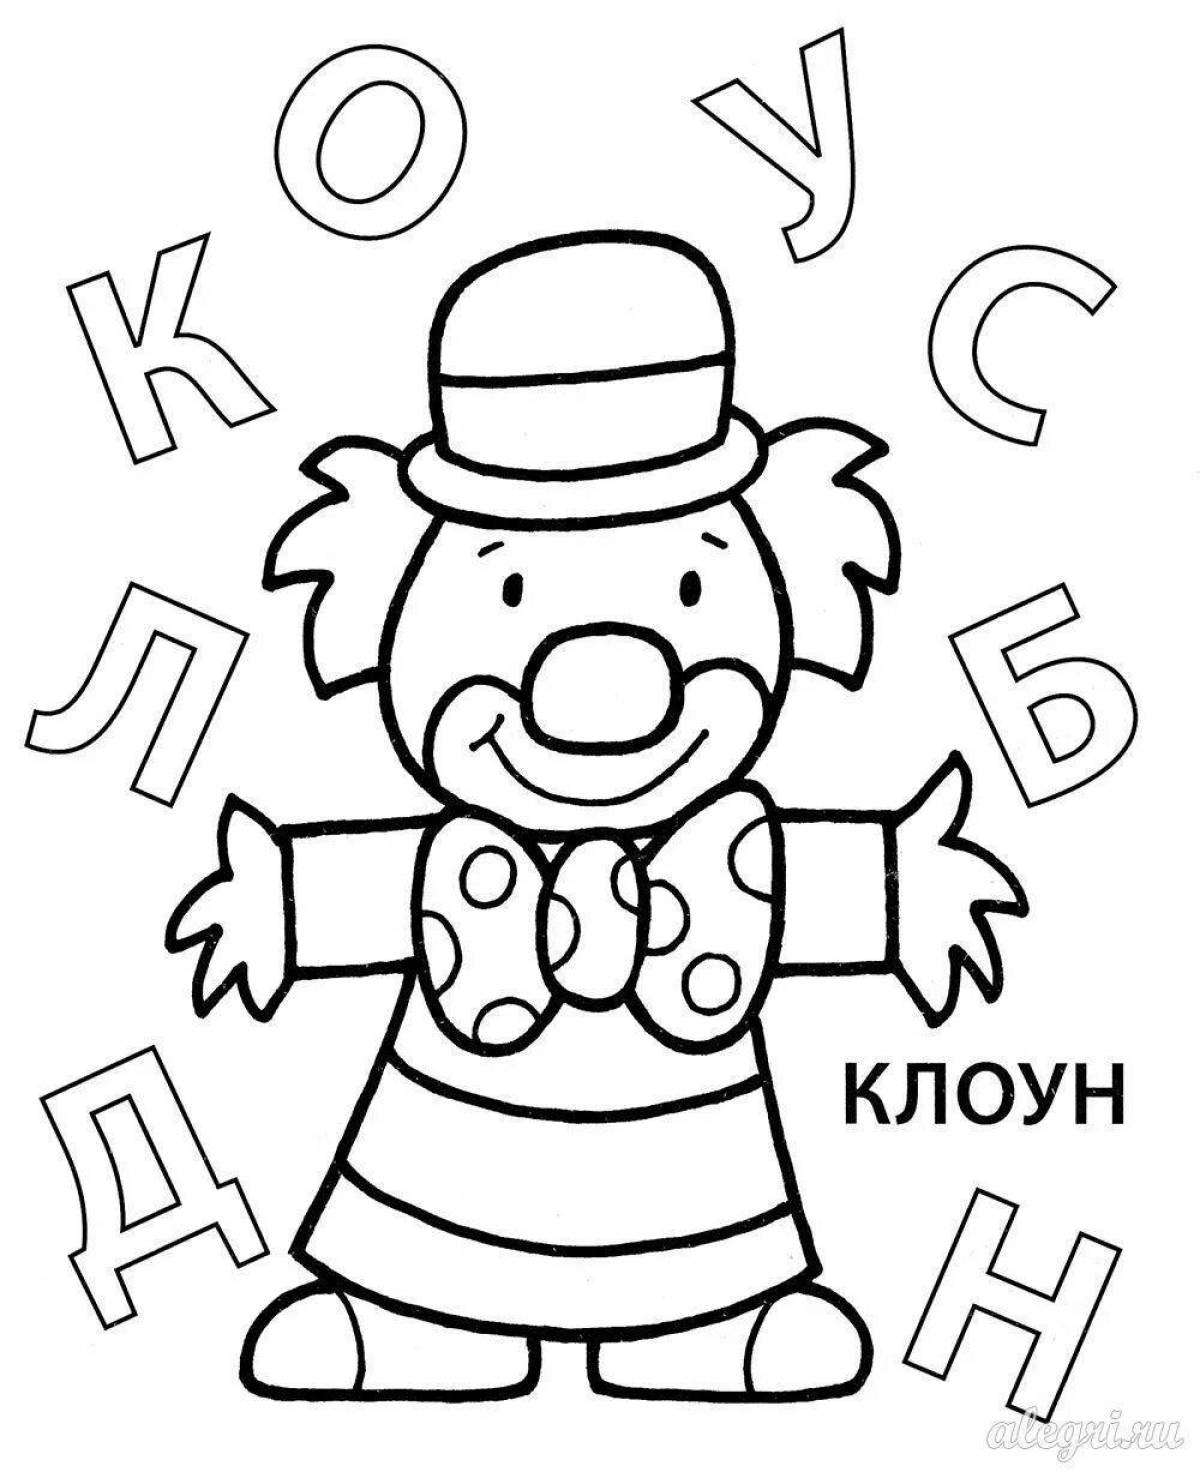 Playful clown coloring book for 6-7 year olds